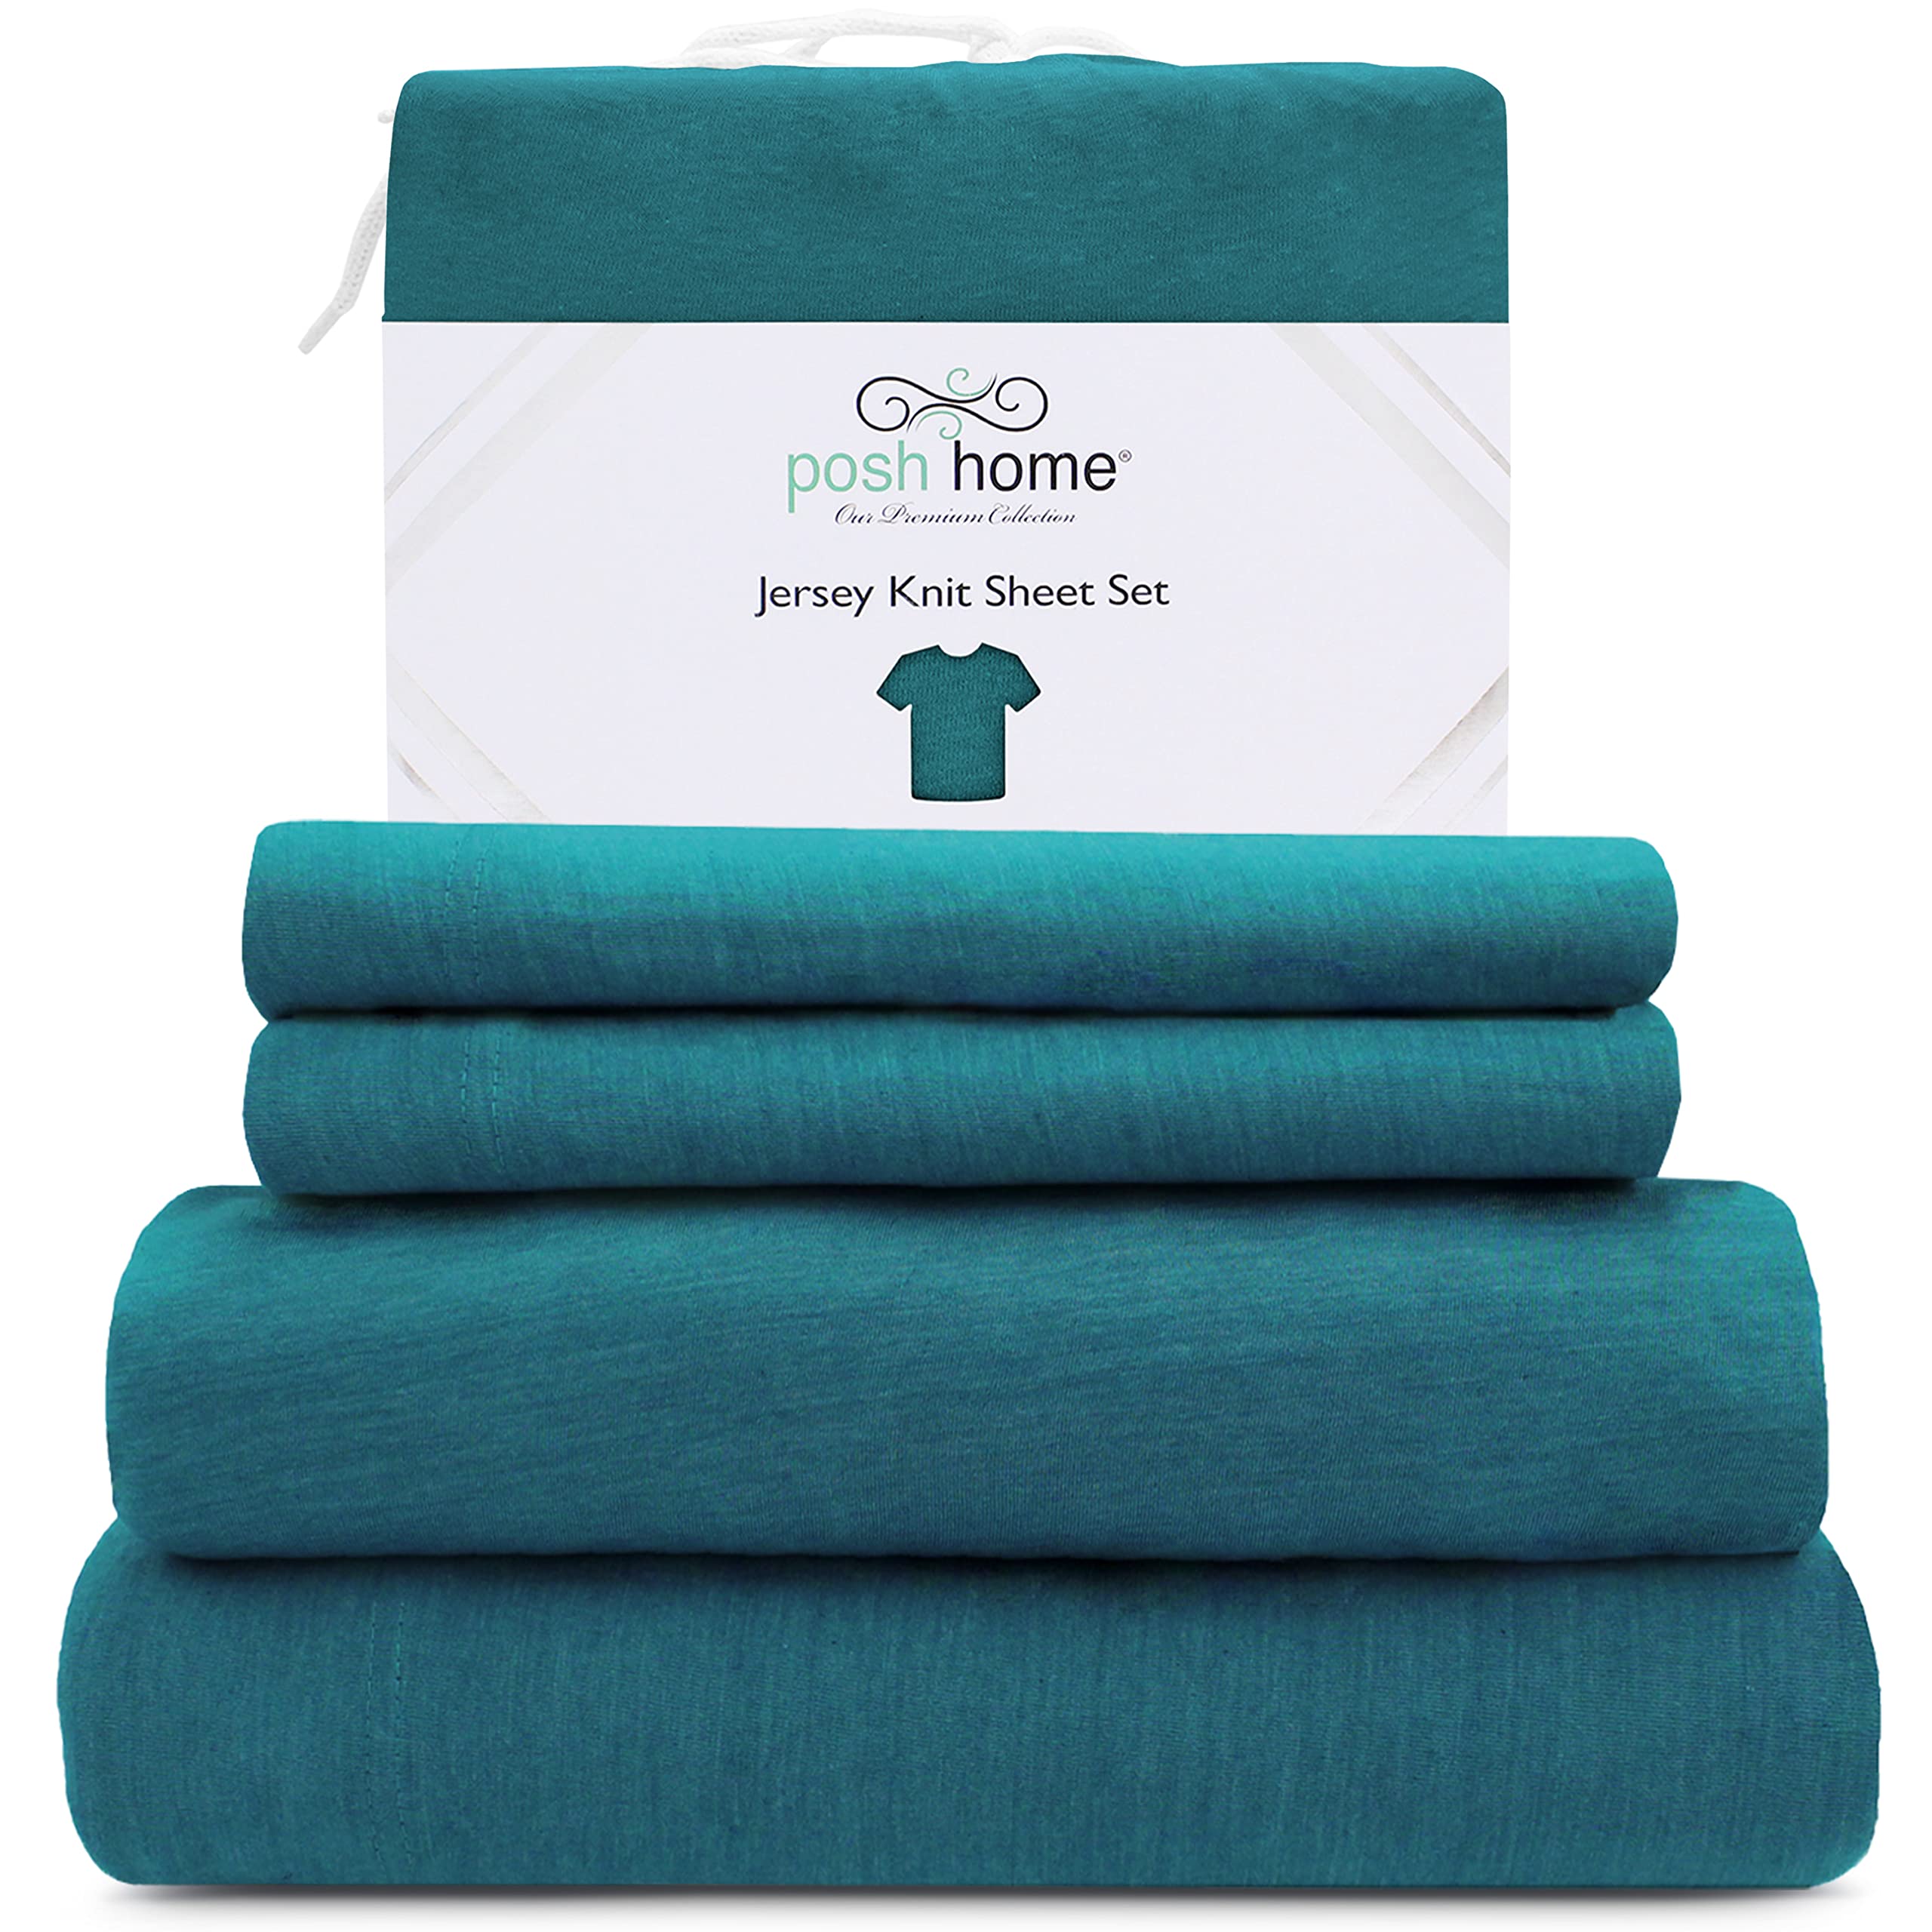 Posh Home Jersey Knit Sheet Set - 3-Piece Sheets - T-Shirt Breathable & Soft cotton Jersey Sheets - Includes Flat Fitted Sheet, 